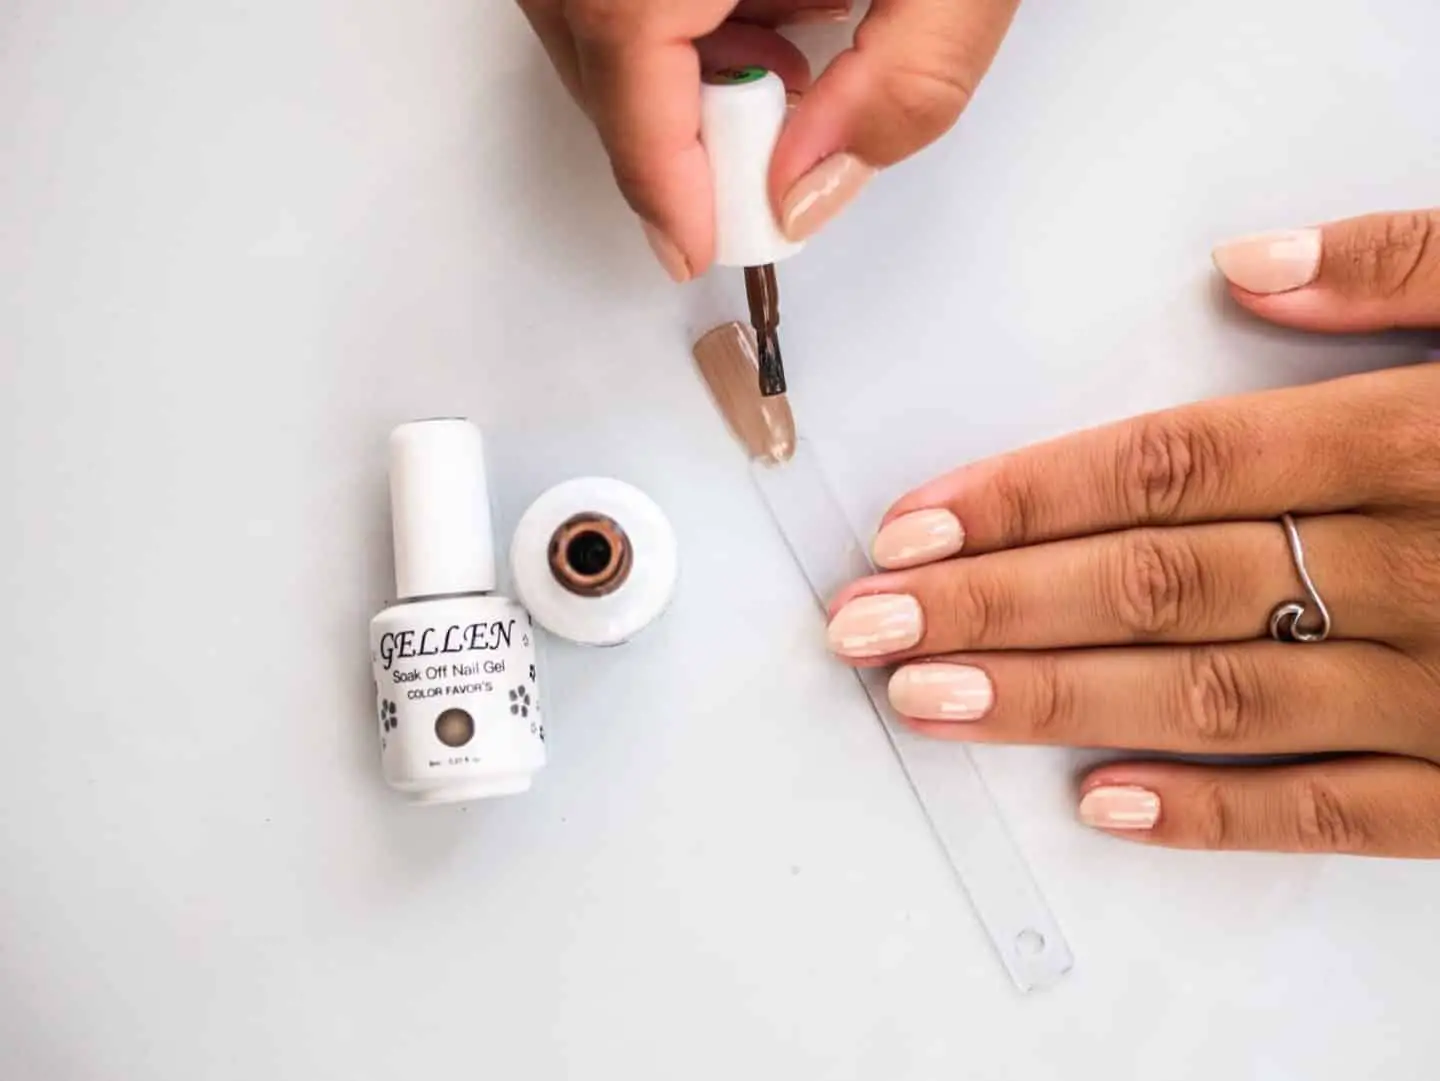 At Home Gel Nail Kit – What you need and how to do it